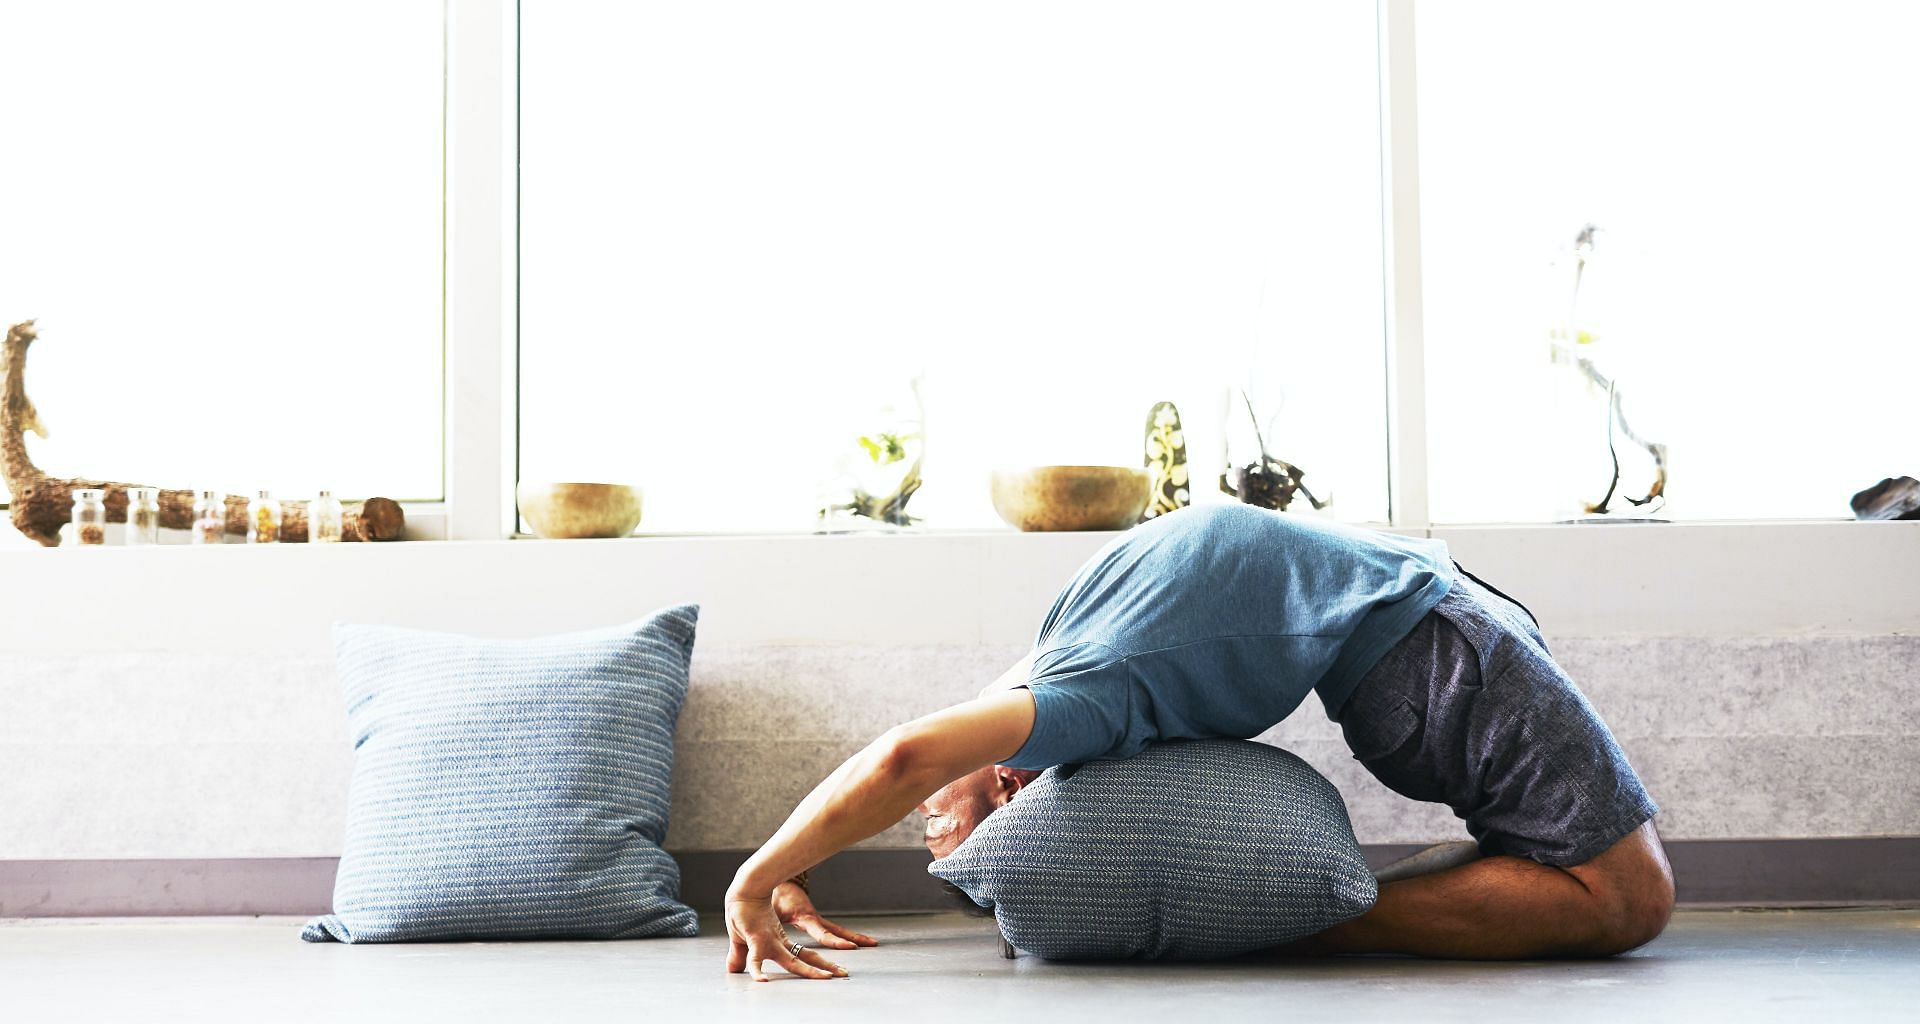 Melt Into This Restorative Yoga Routine To Lower Cortisol & Slow Aging | Restorative  yoga poses, Restorative yoga, Yoga routine